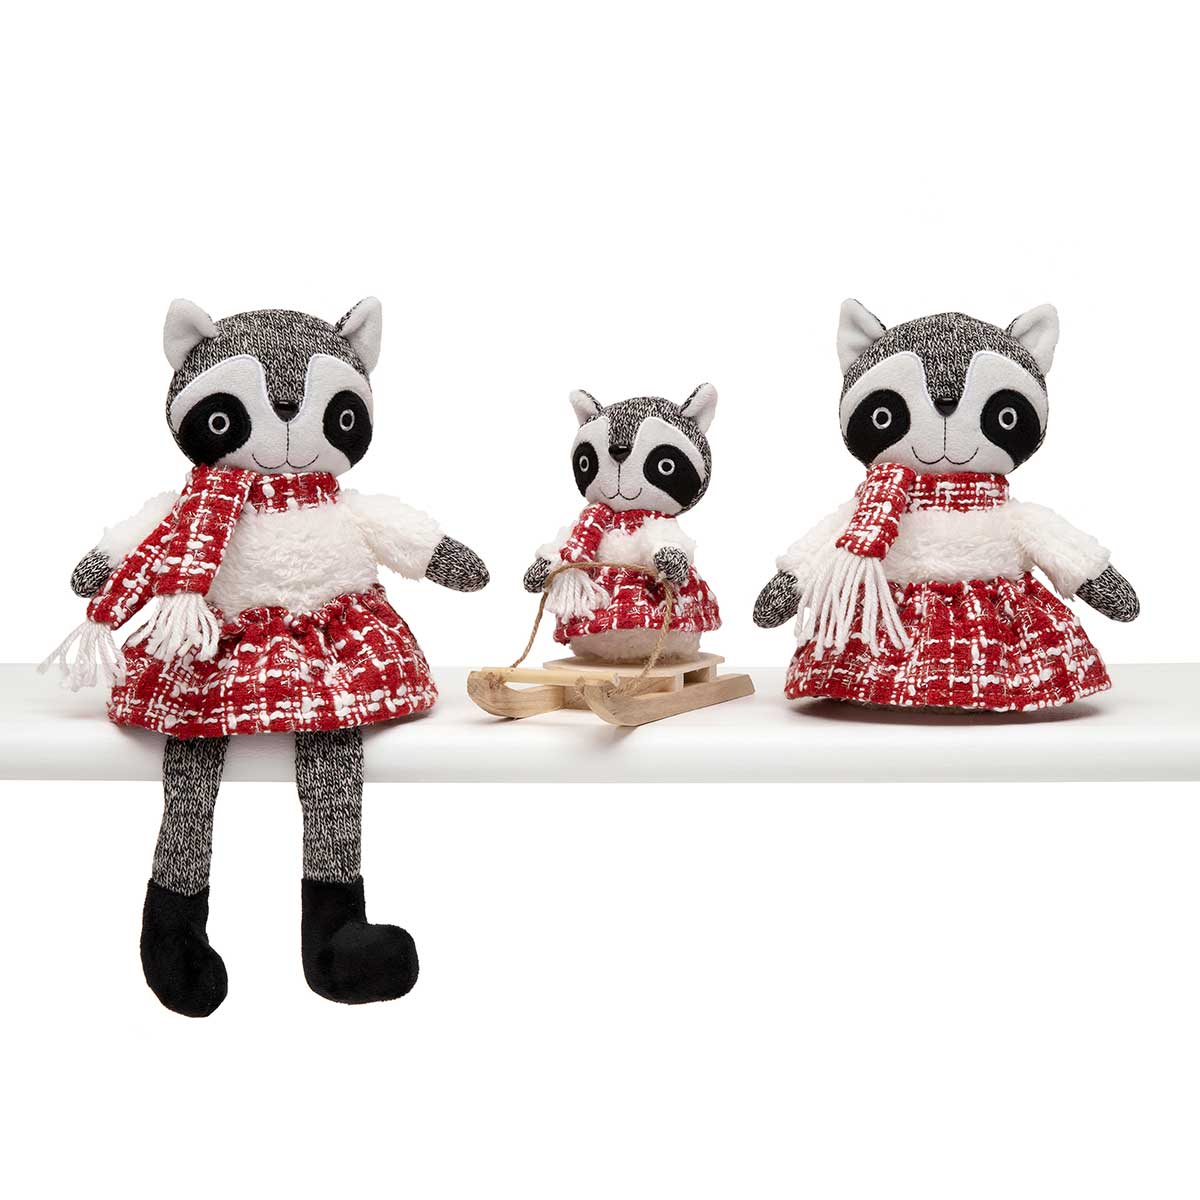 RACCOON WINTER CRITTER GIRL 6IN X 8IN RED/WHITE/GREY